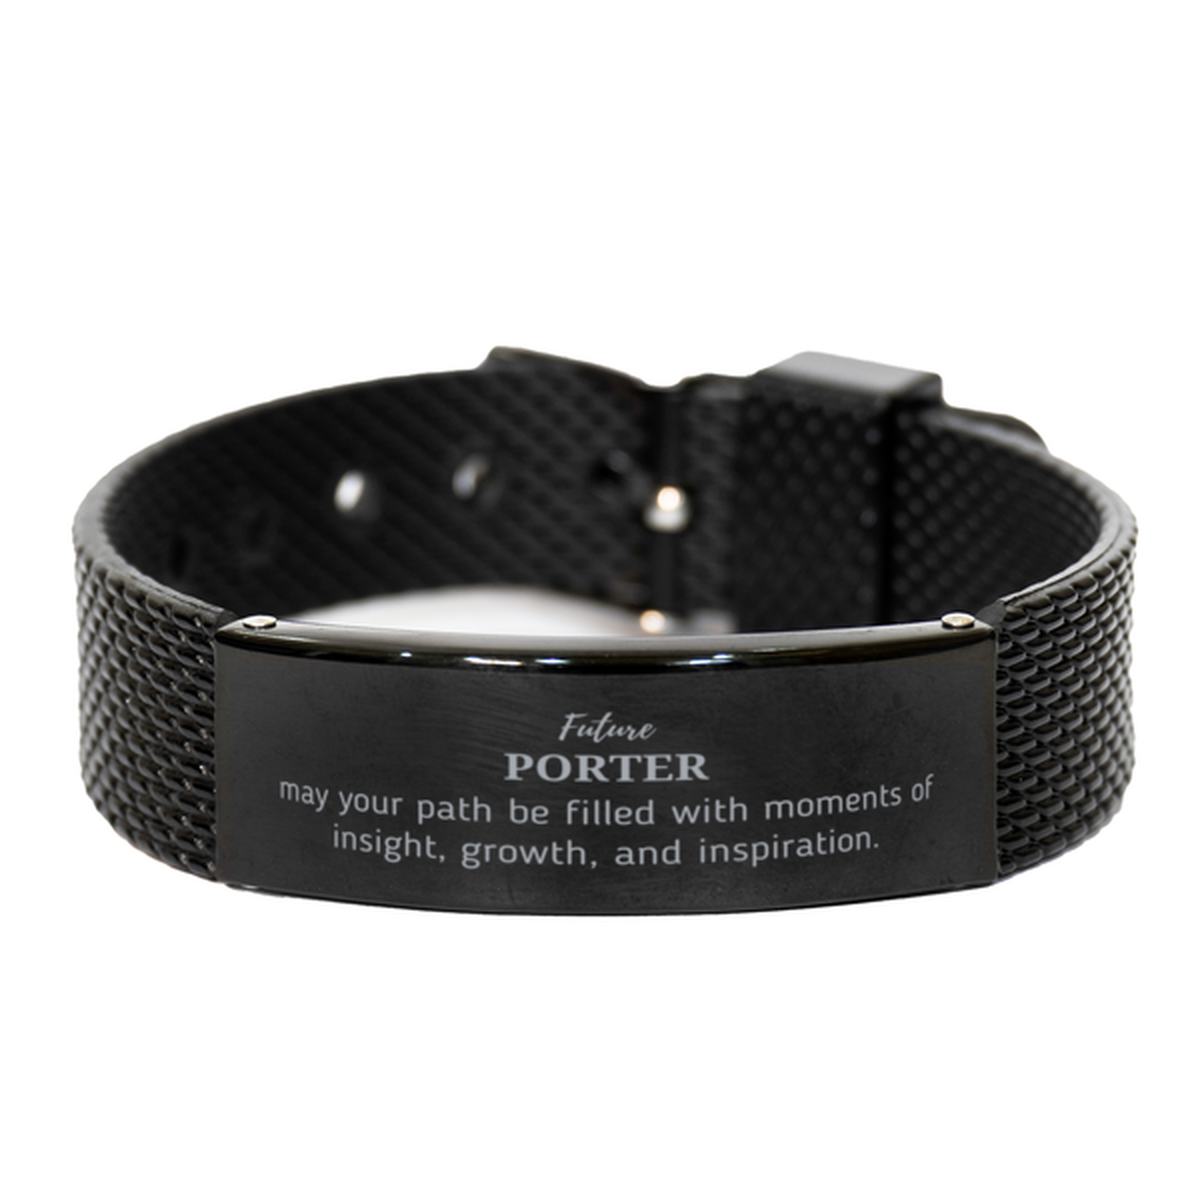 Future Porter Gifts, May your path be filled with moments of insight, Graduation Gifts for New Porter, Christmas Unique Black Shark Mesh Bracelet For Men, Women, Friends